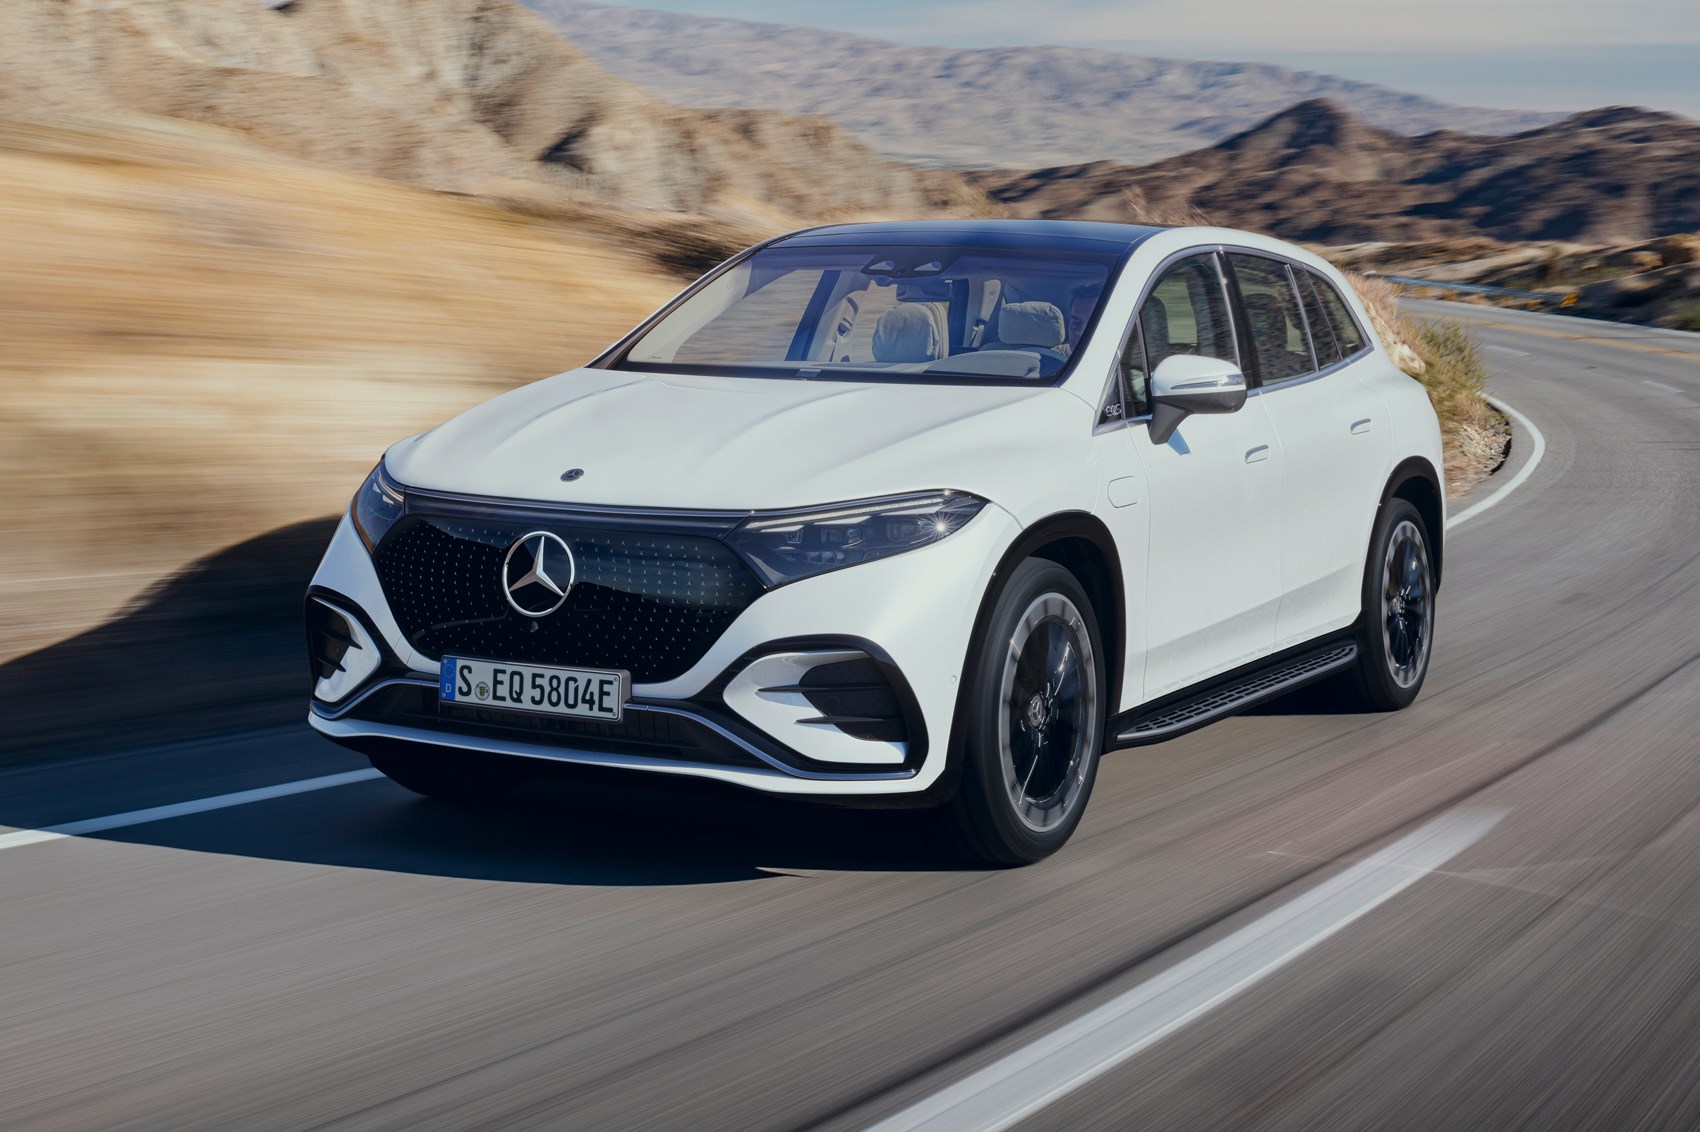 Mercedes EQS SUV priced from £129,170 - looks rad, goes like crazy